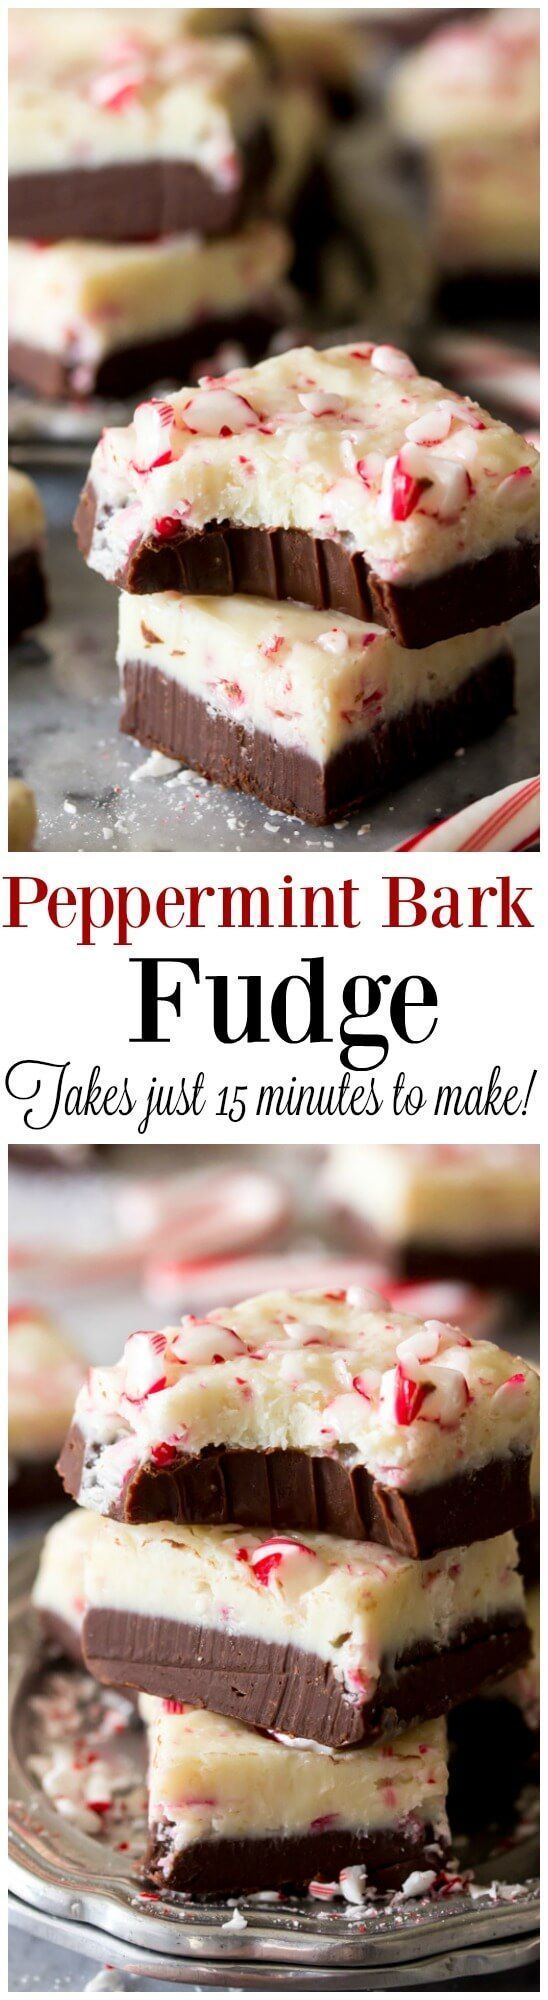 peppermint-bark-fudge-made-in-just-15-minutes-without-a-candy-thermometer-sugar-sp